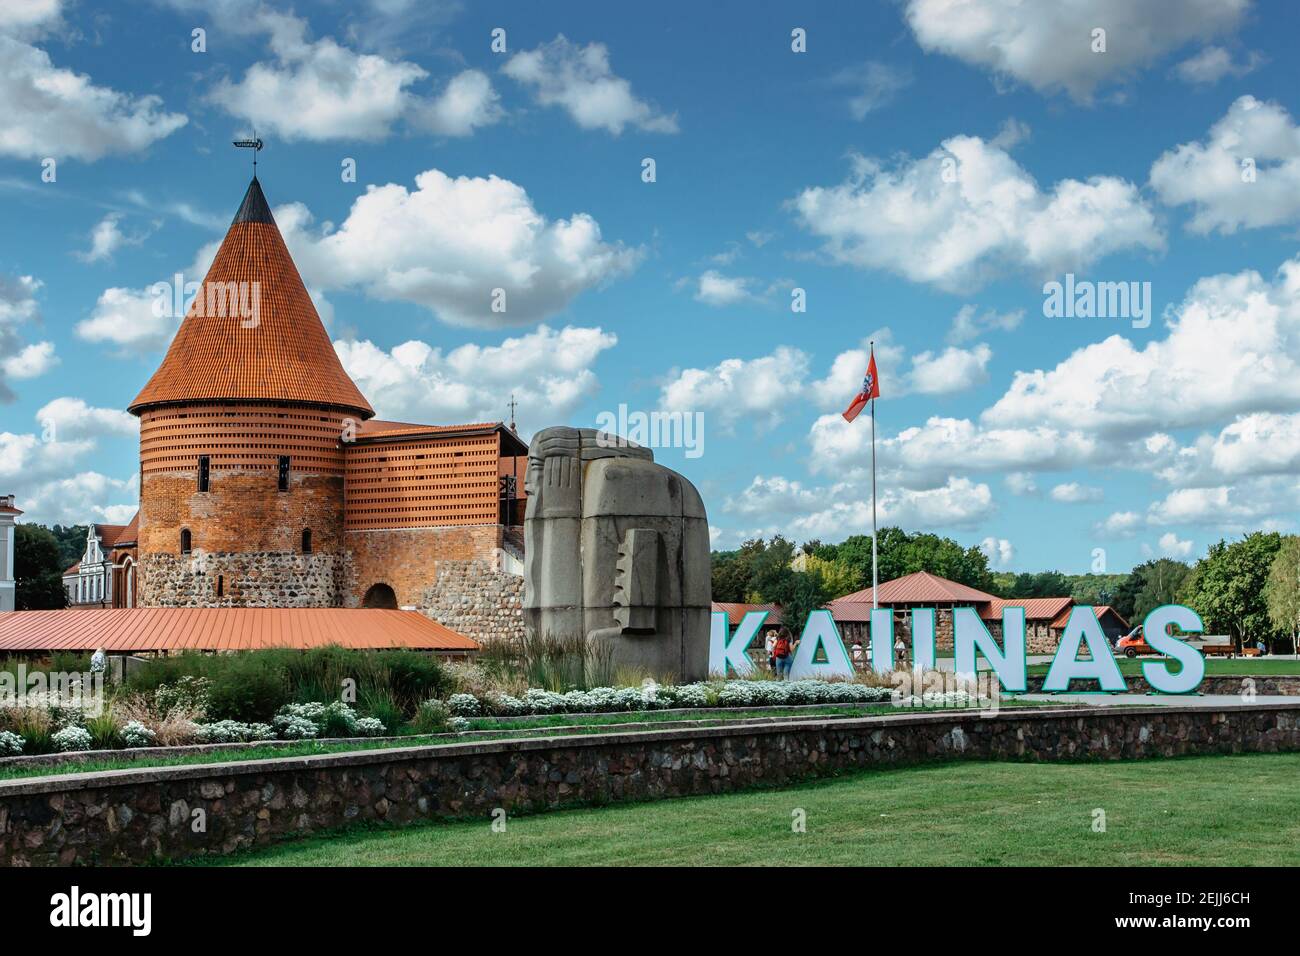 Kaunas,Lithuania - August 23,2019. Old Town of Kaunas with architectural monuments and historical buildings.Medieval castle in Lietuva on bright Stock Photo